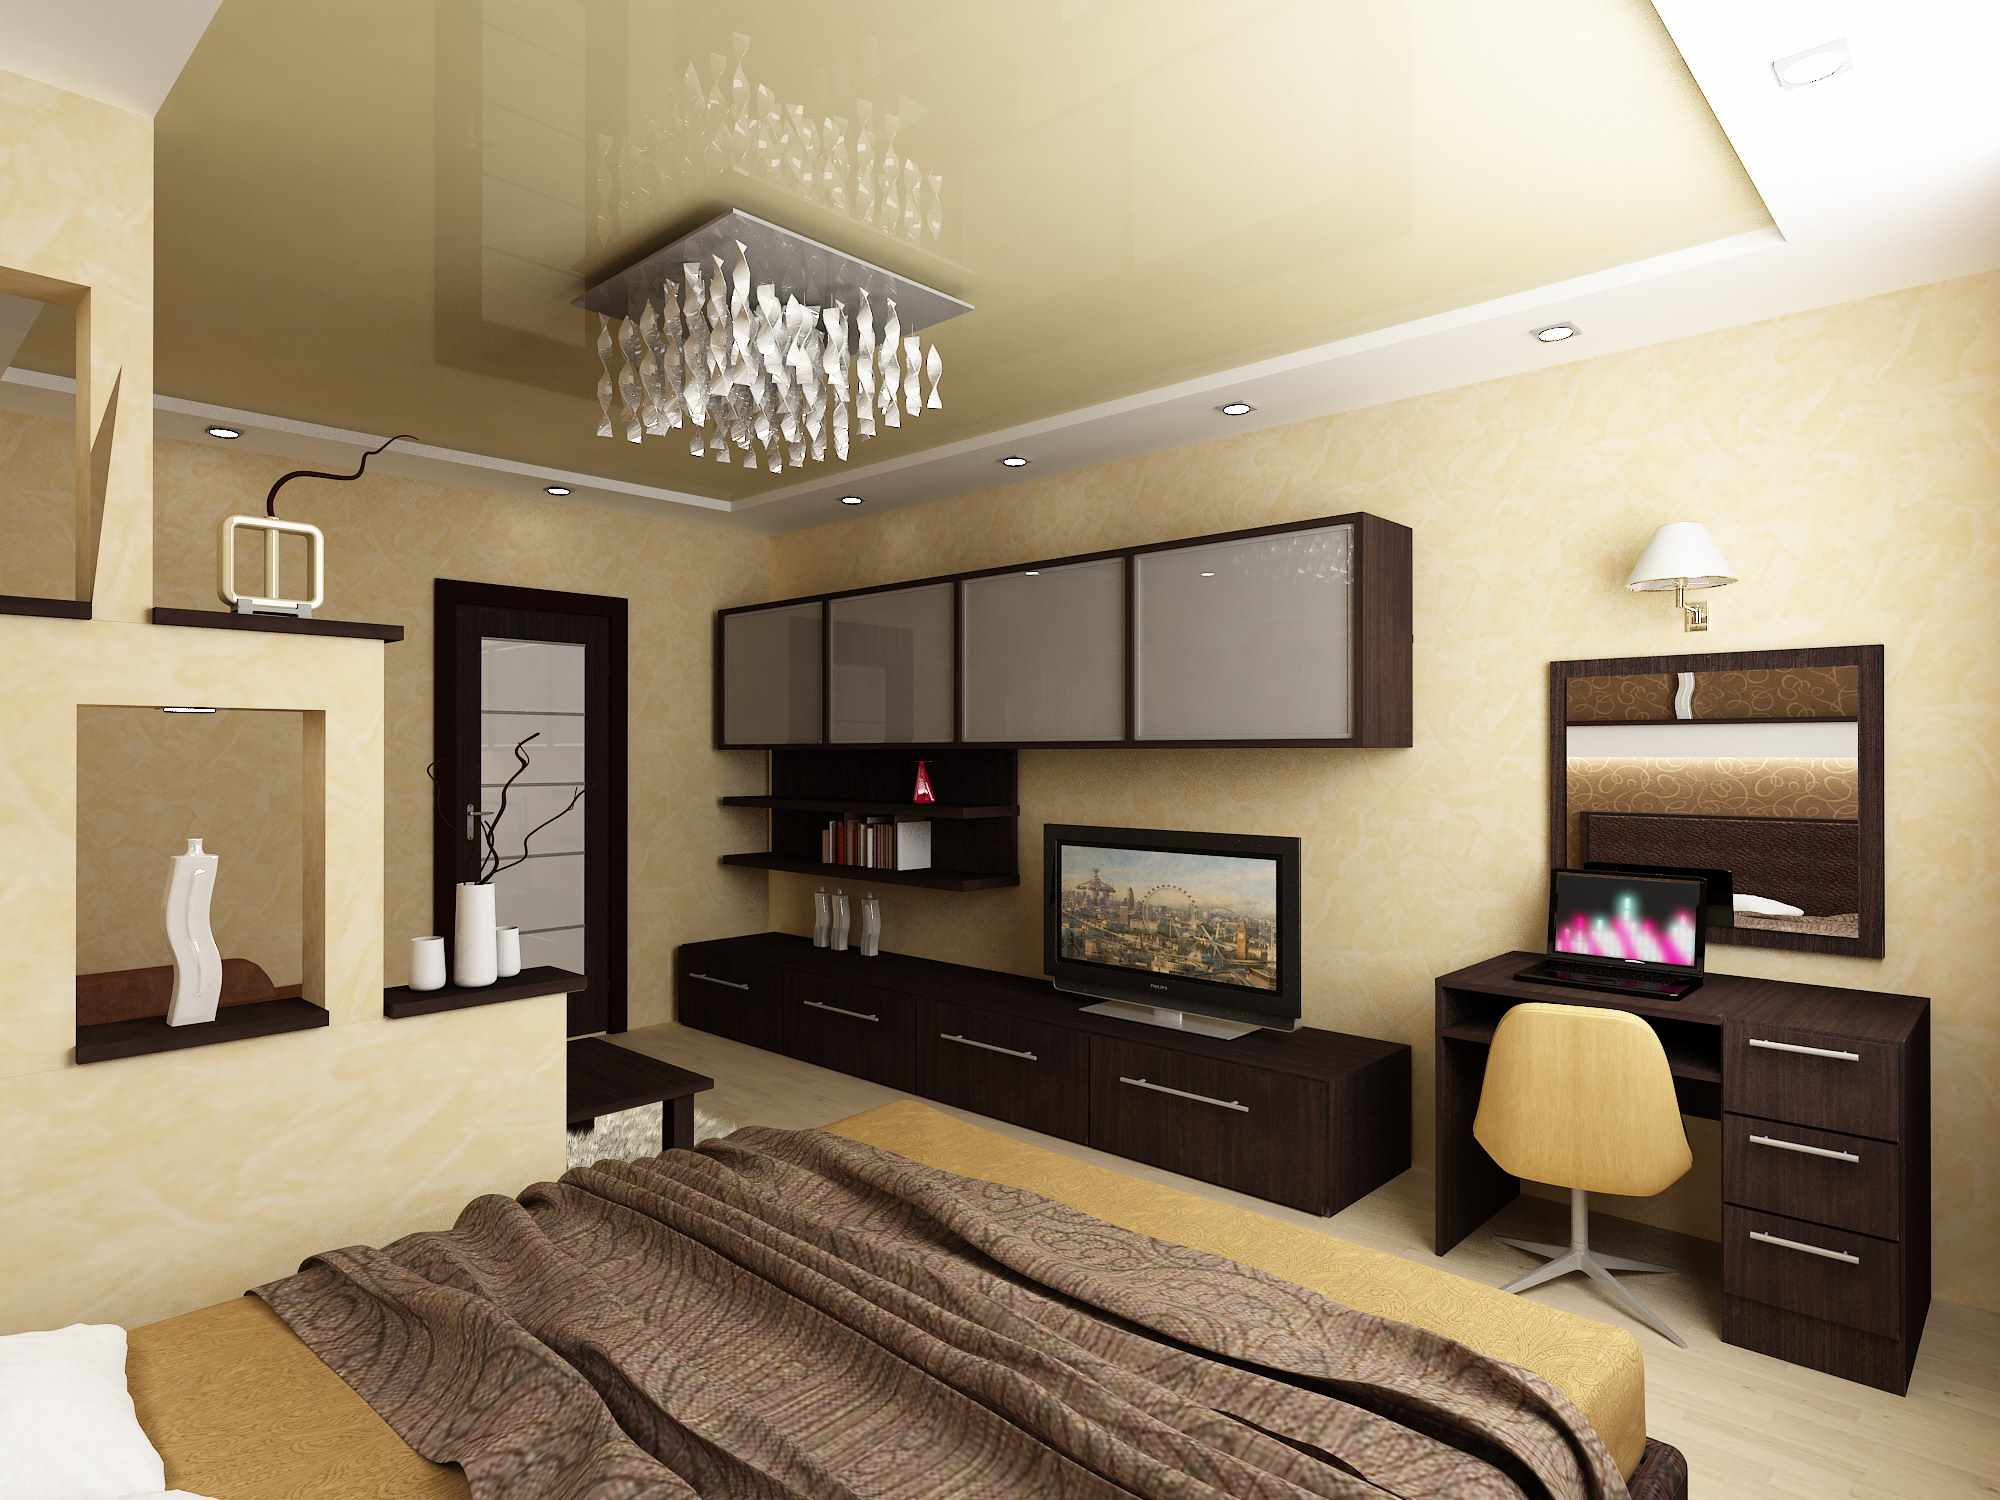 an example of a beautiful bedroom design of 20 meters